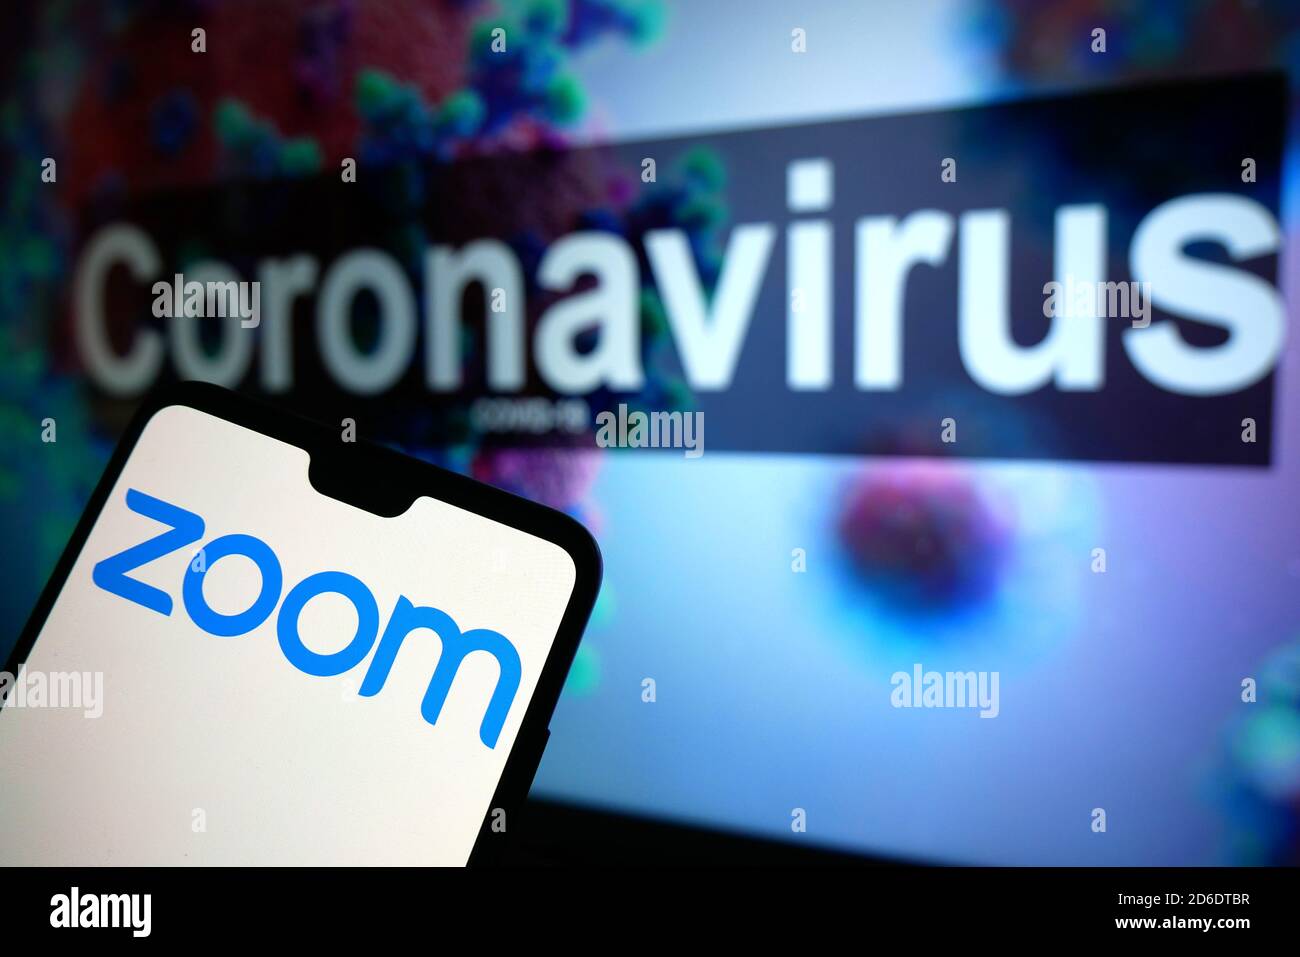 The Zoom logo seen displayed on a mobile phone with an illustrative model of the Coronavirus displayed on a monitor in the background. Stock Photo